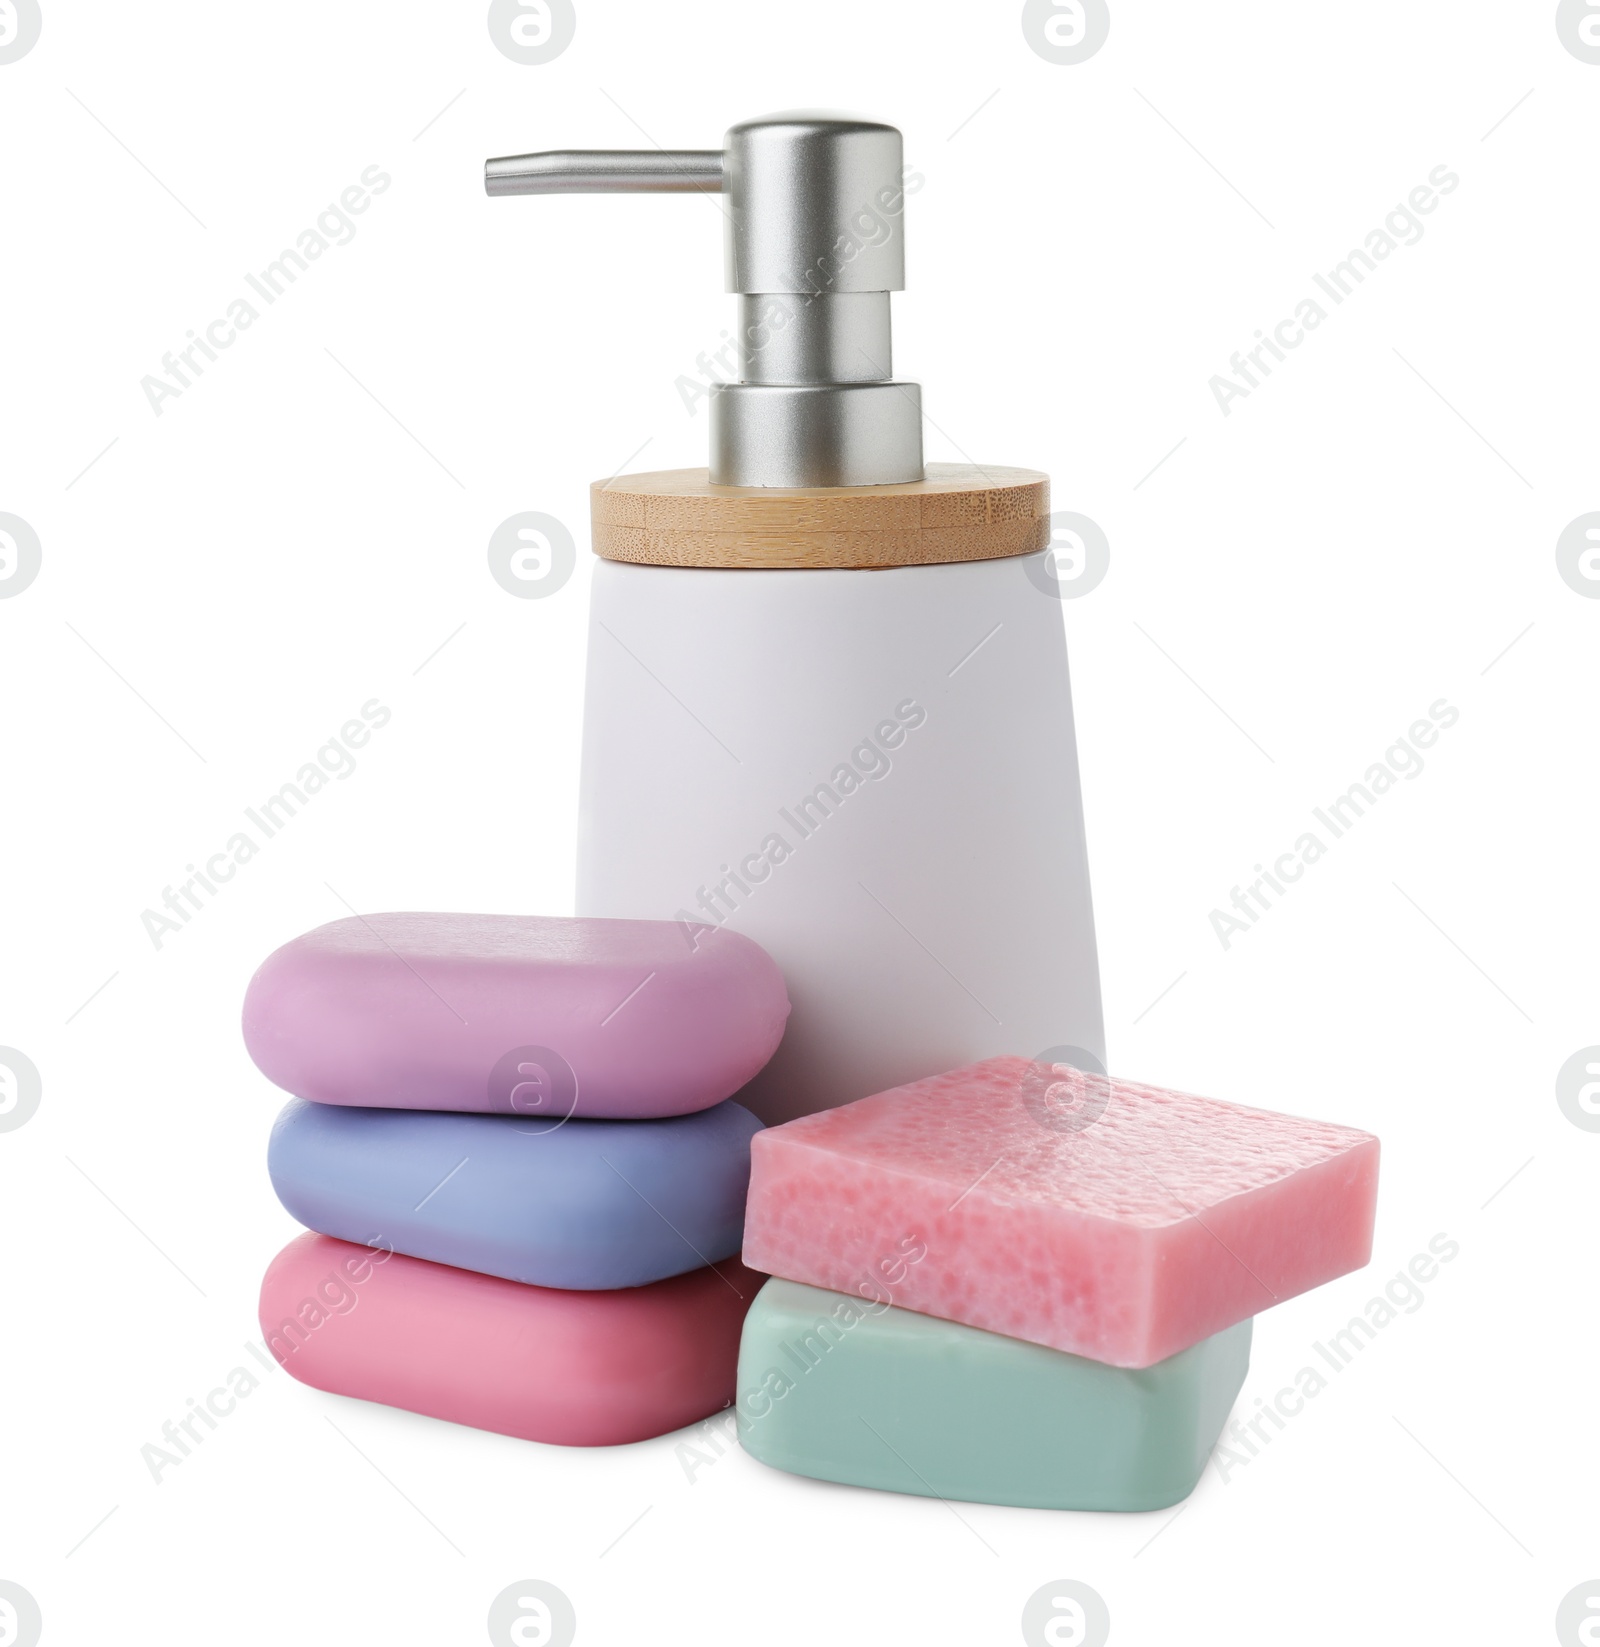 Photo of Different soap bars and dispenser on white background